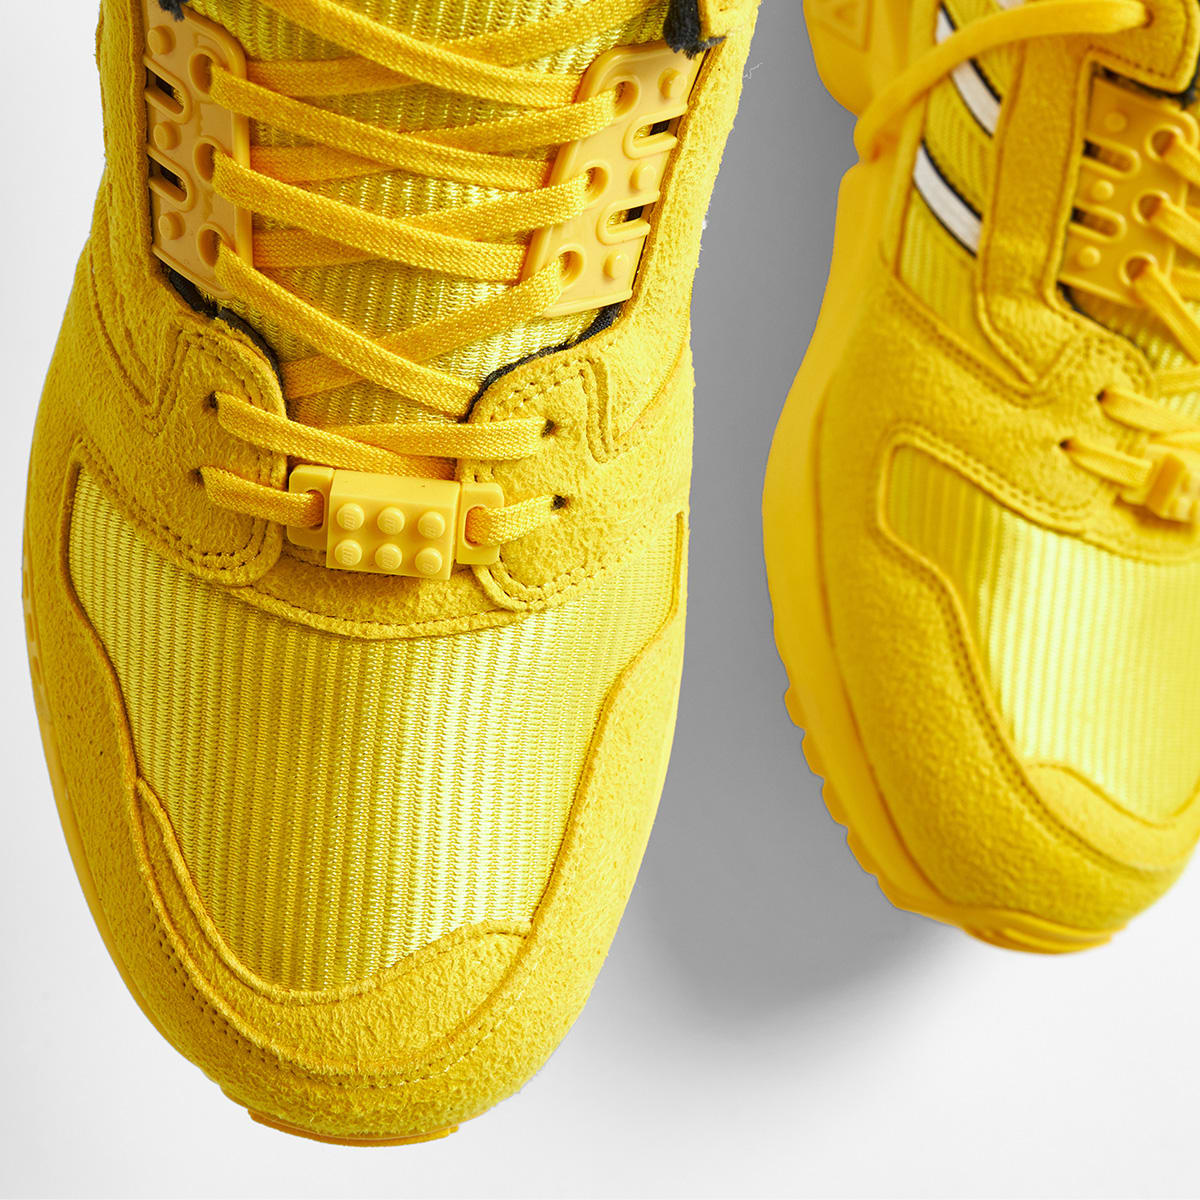 Adidas ZX 8000 Lego (Eqt Yellow) | END. Launches